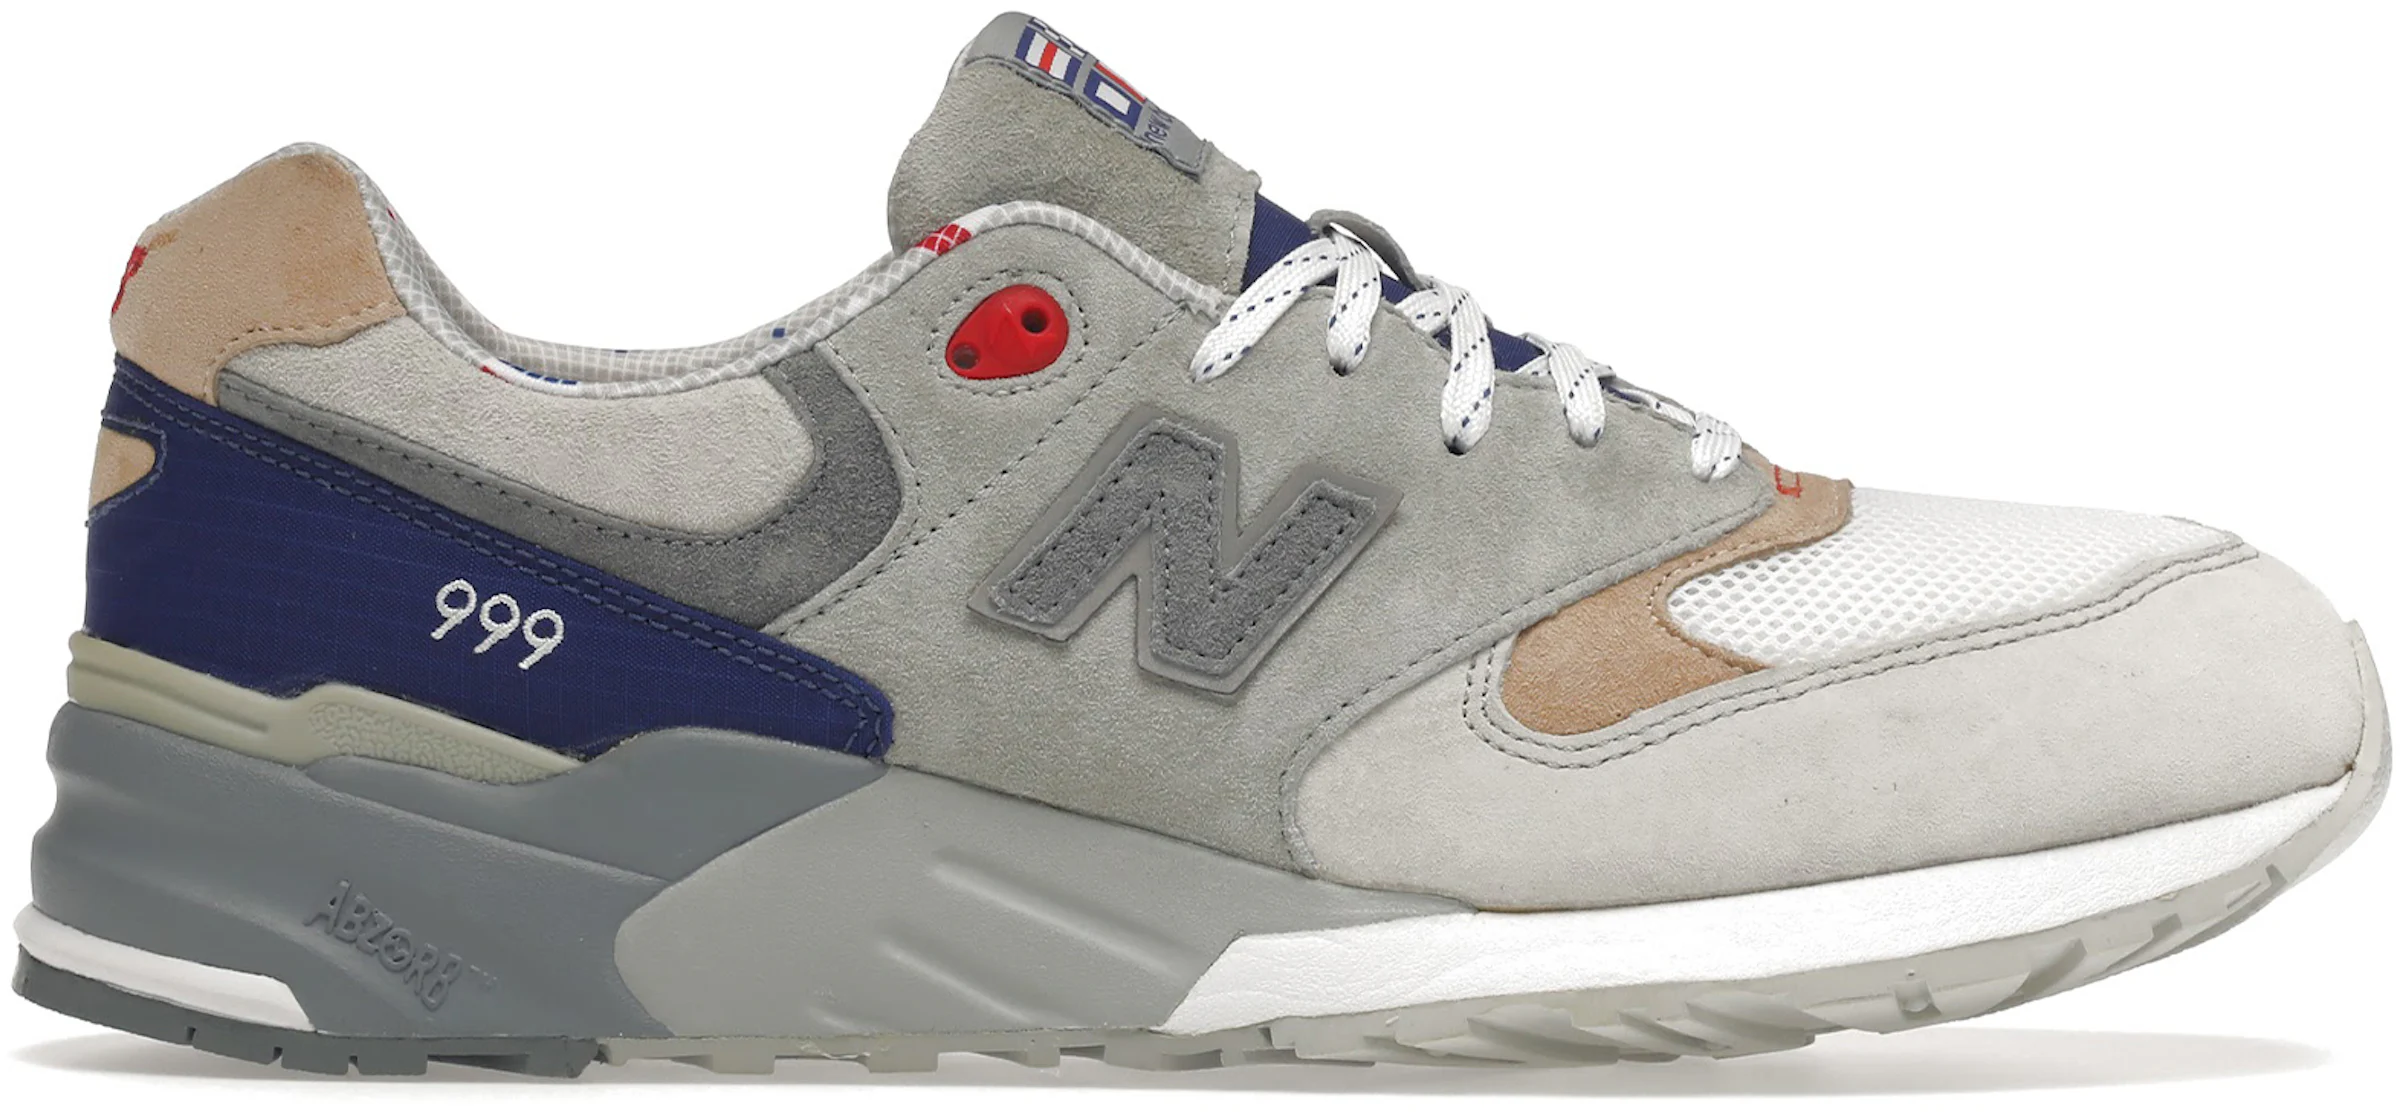 https://stockx.com/en-gb/new-balance-999-concepts-the-kennedy